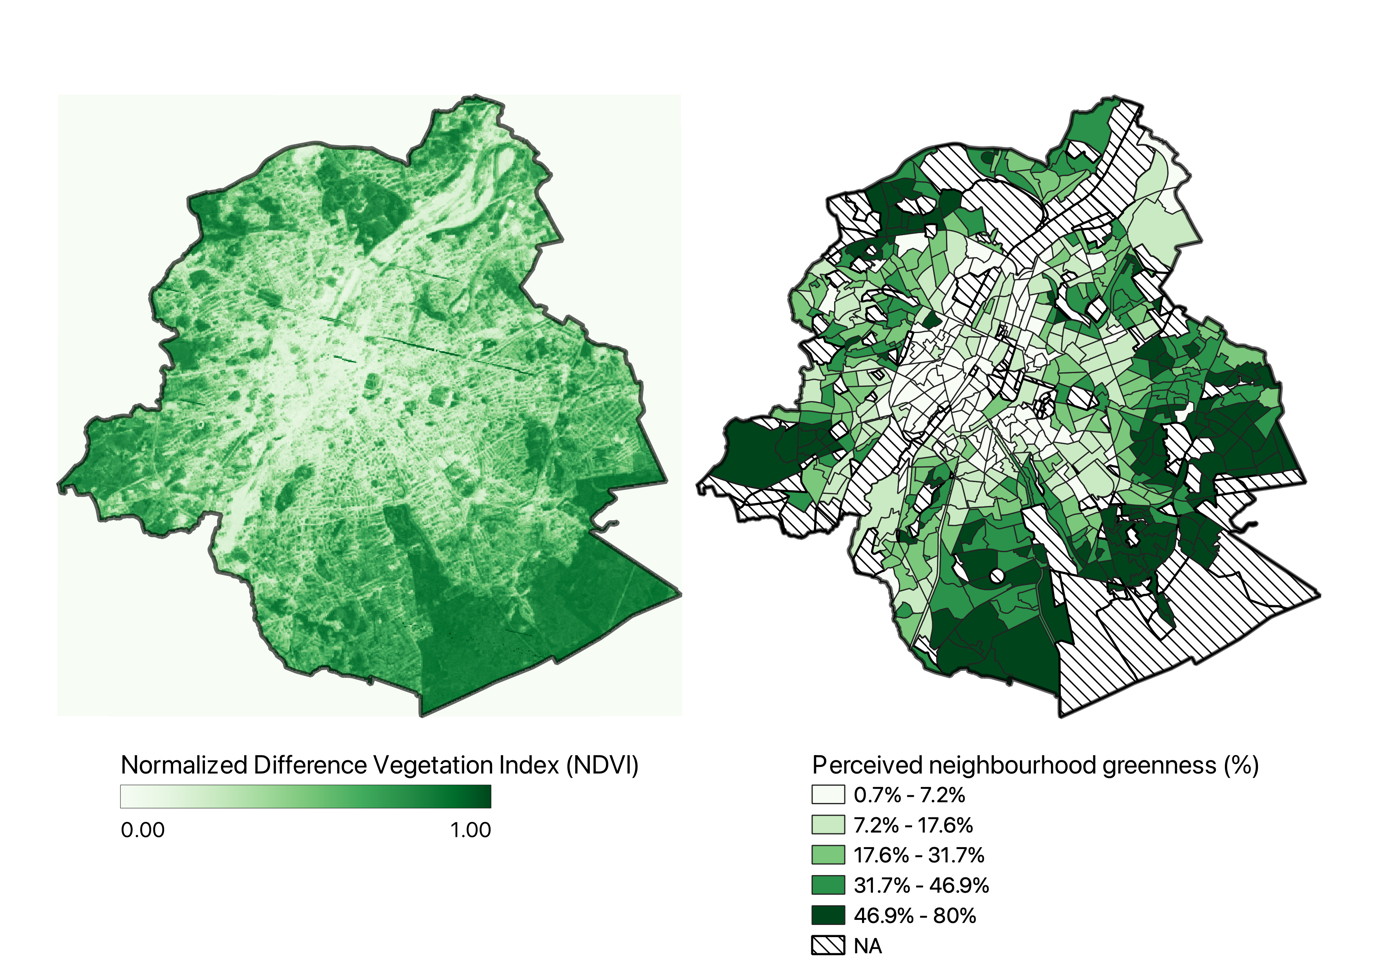 Mortality risk due to air pollution highest in Brussels’ deprived areas